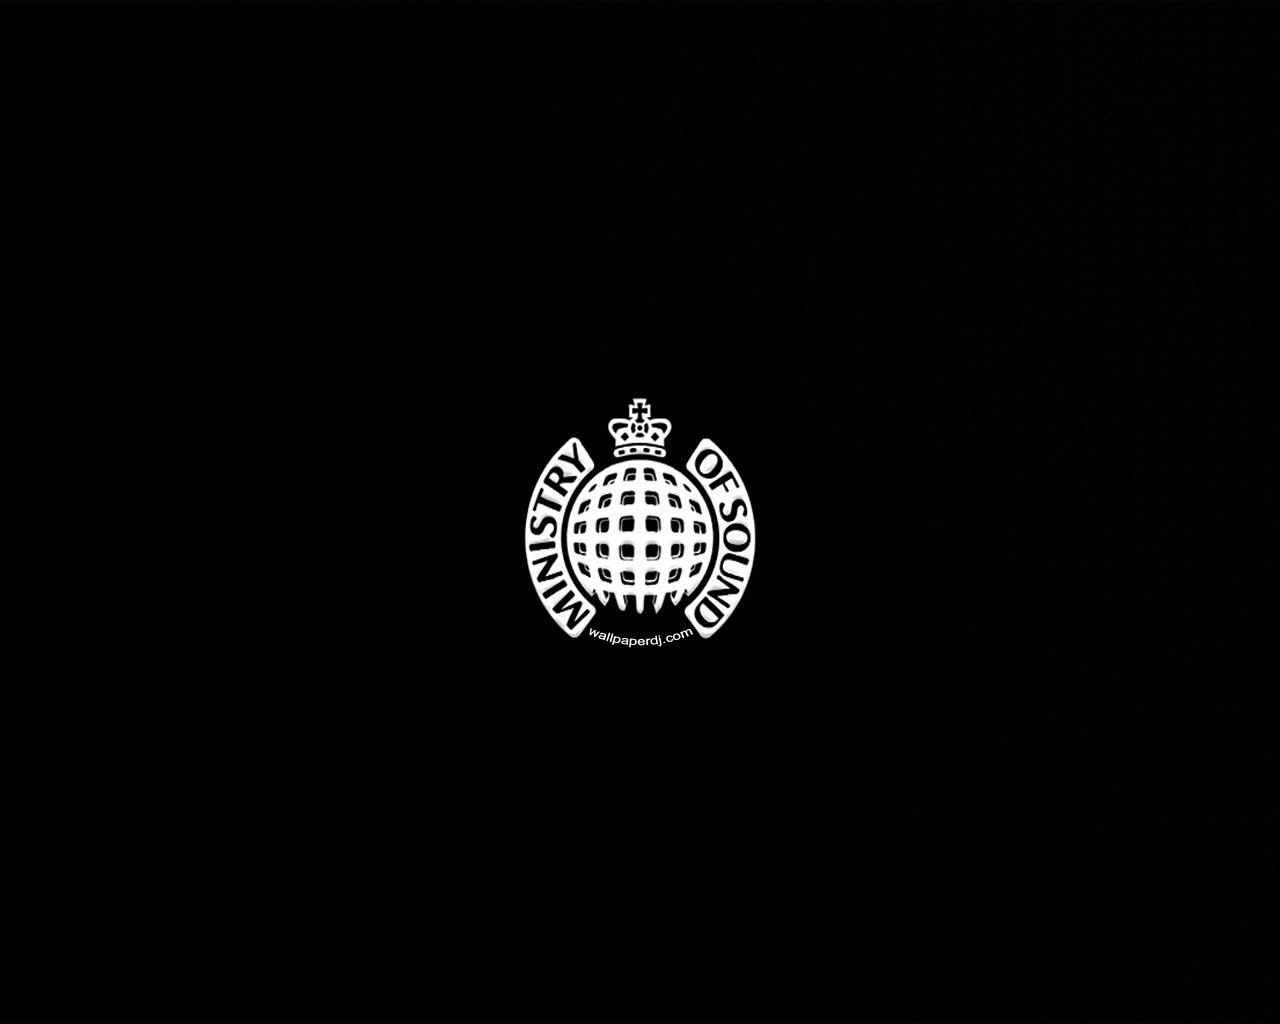 Ministry of sound logo wallpaper, music and dance wallpaper